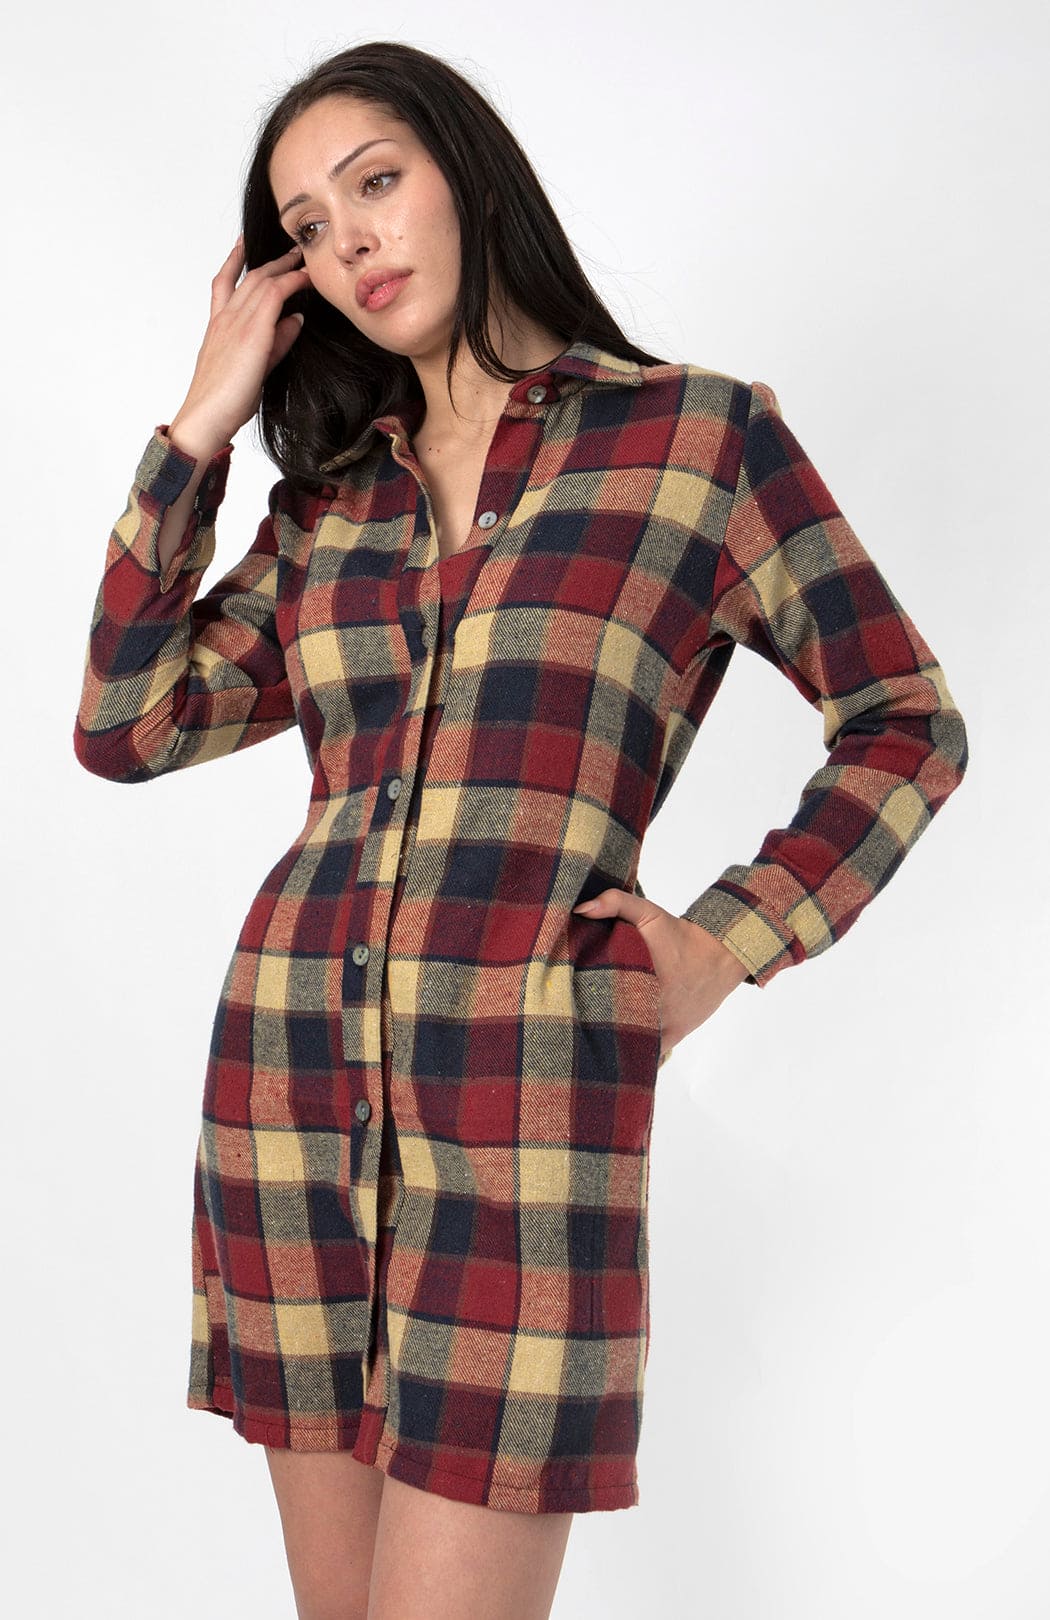 Flannel Dress - Cameo Clothing Line